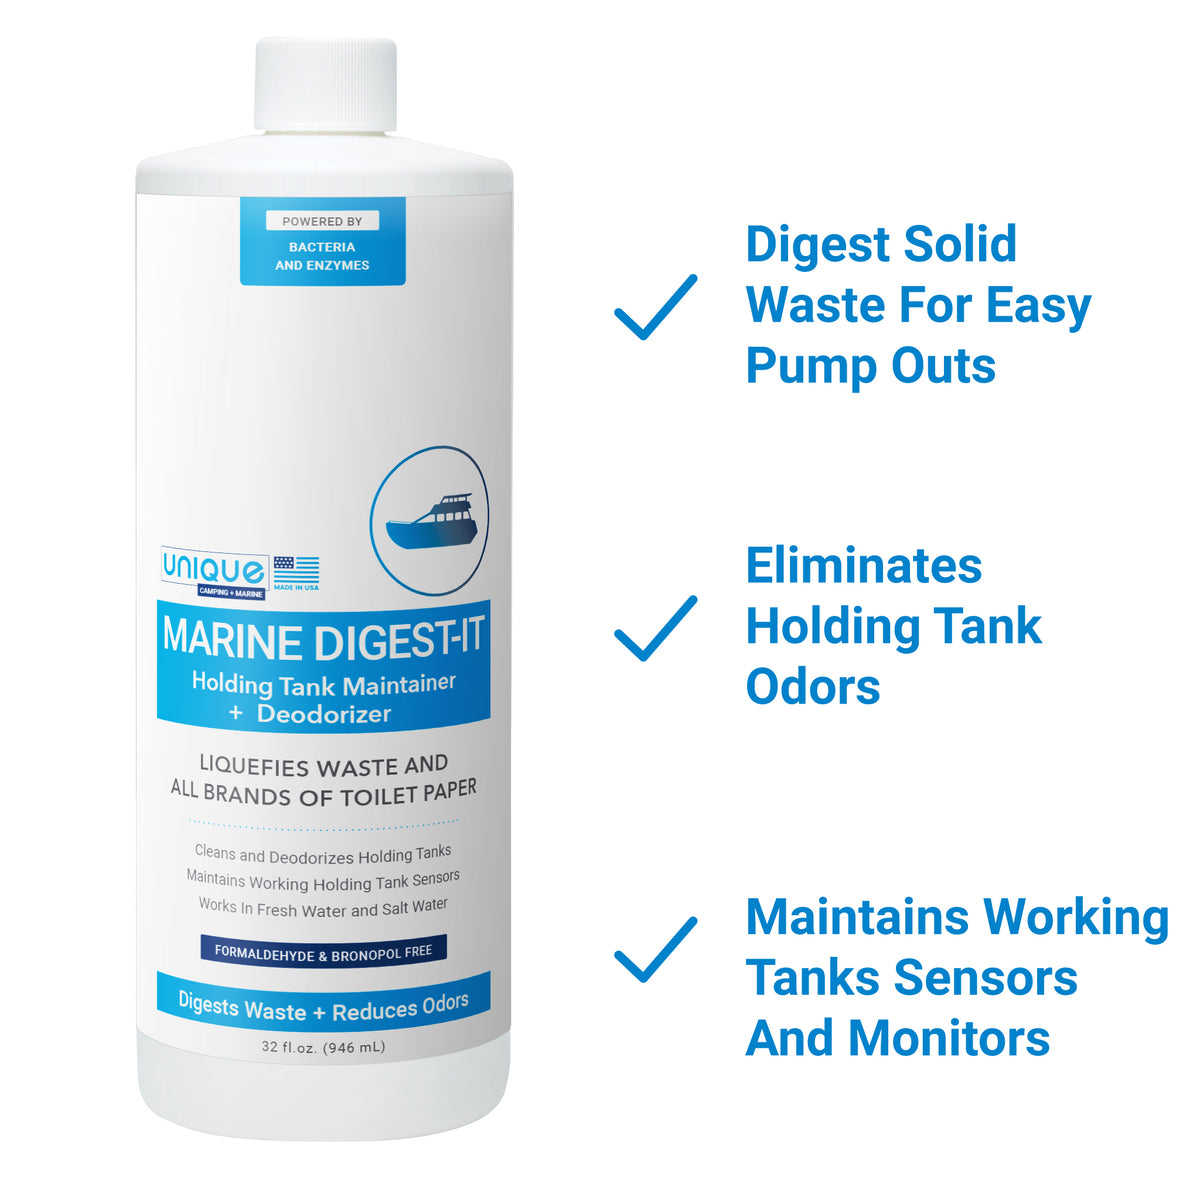 Marine Digest-It 32 oz. Digest waste for easy pump outs, eliminate holding tank odors, maintain working sensors